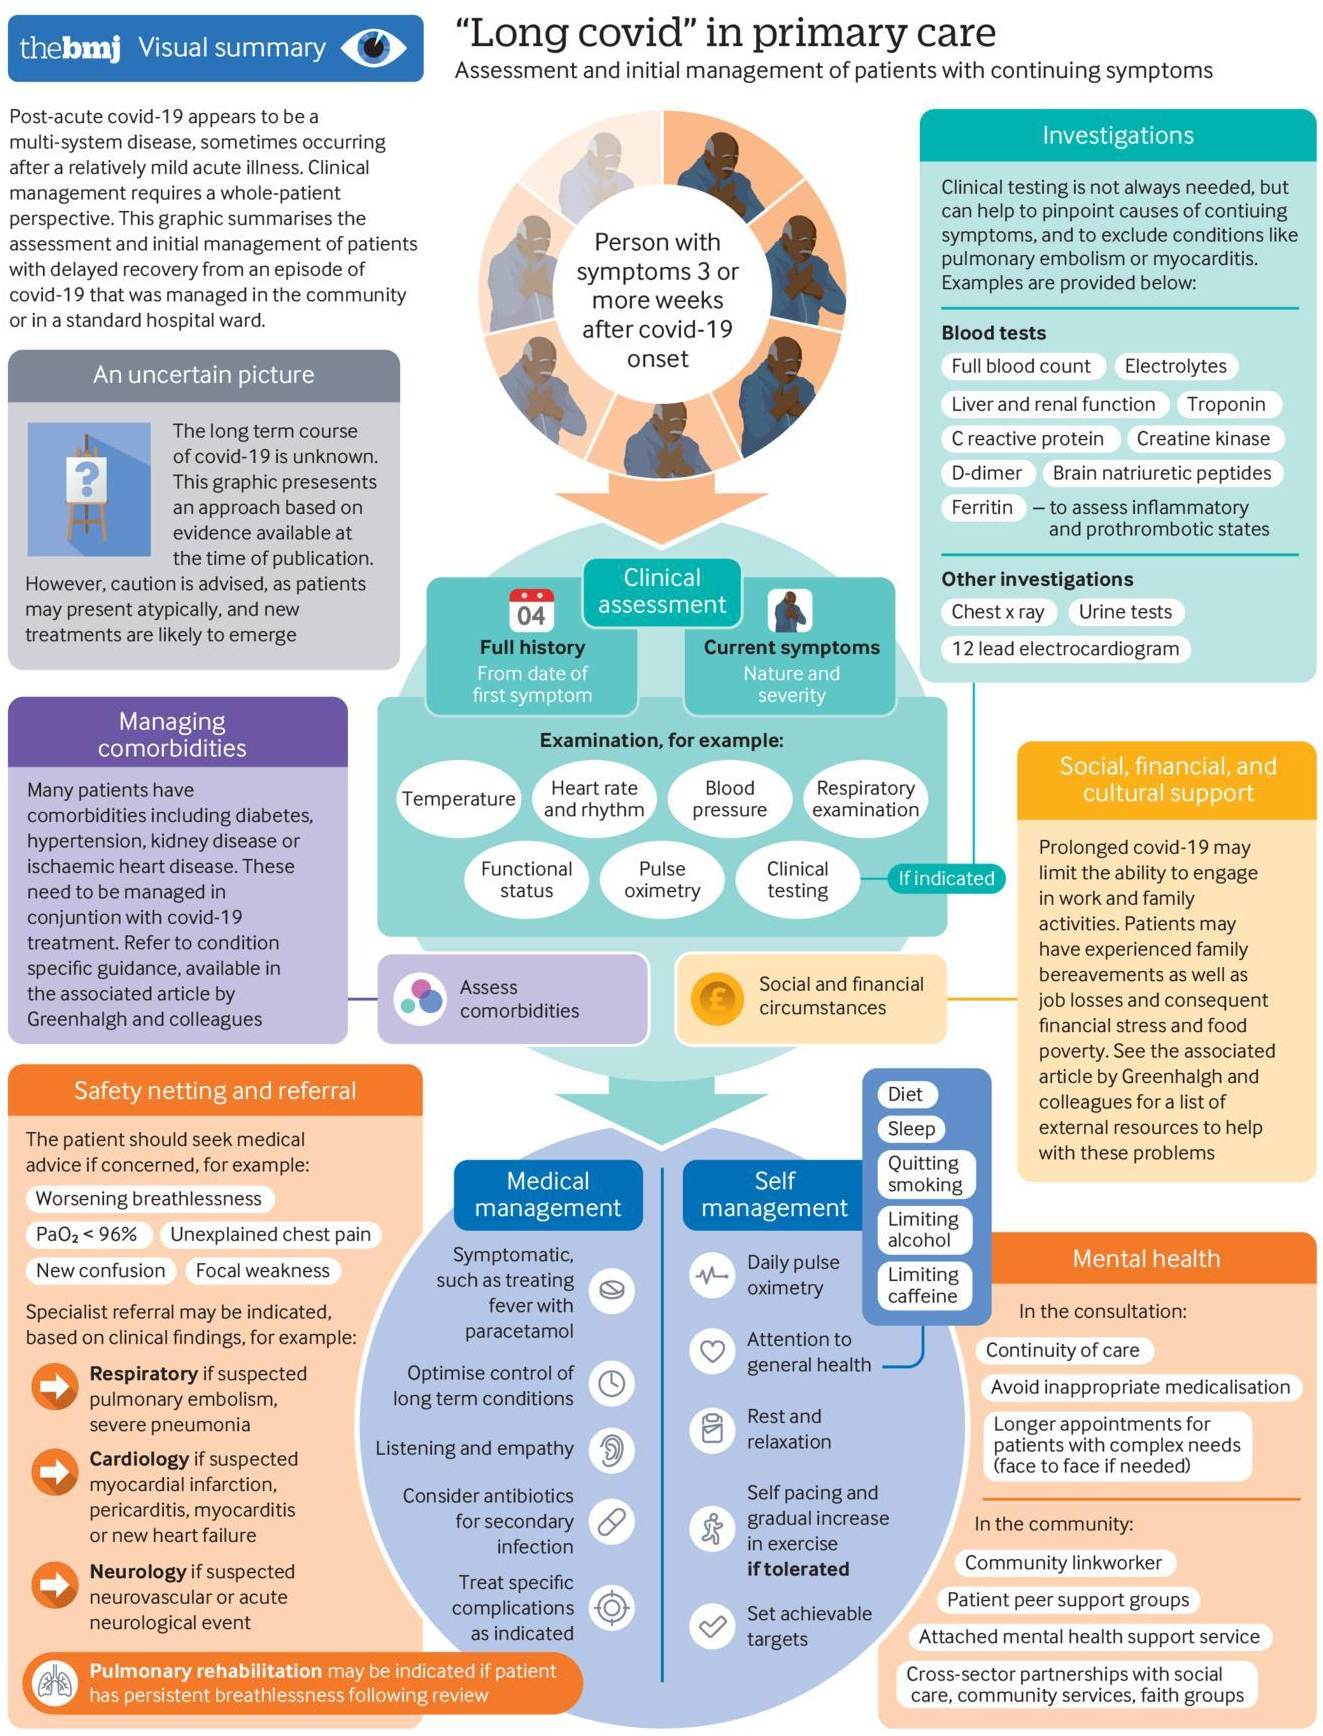 Covid-19 Post Acute Long Term Symptoms and Prognosis - BMJ Infographic 2020